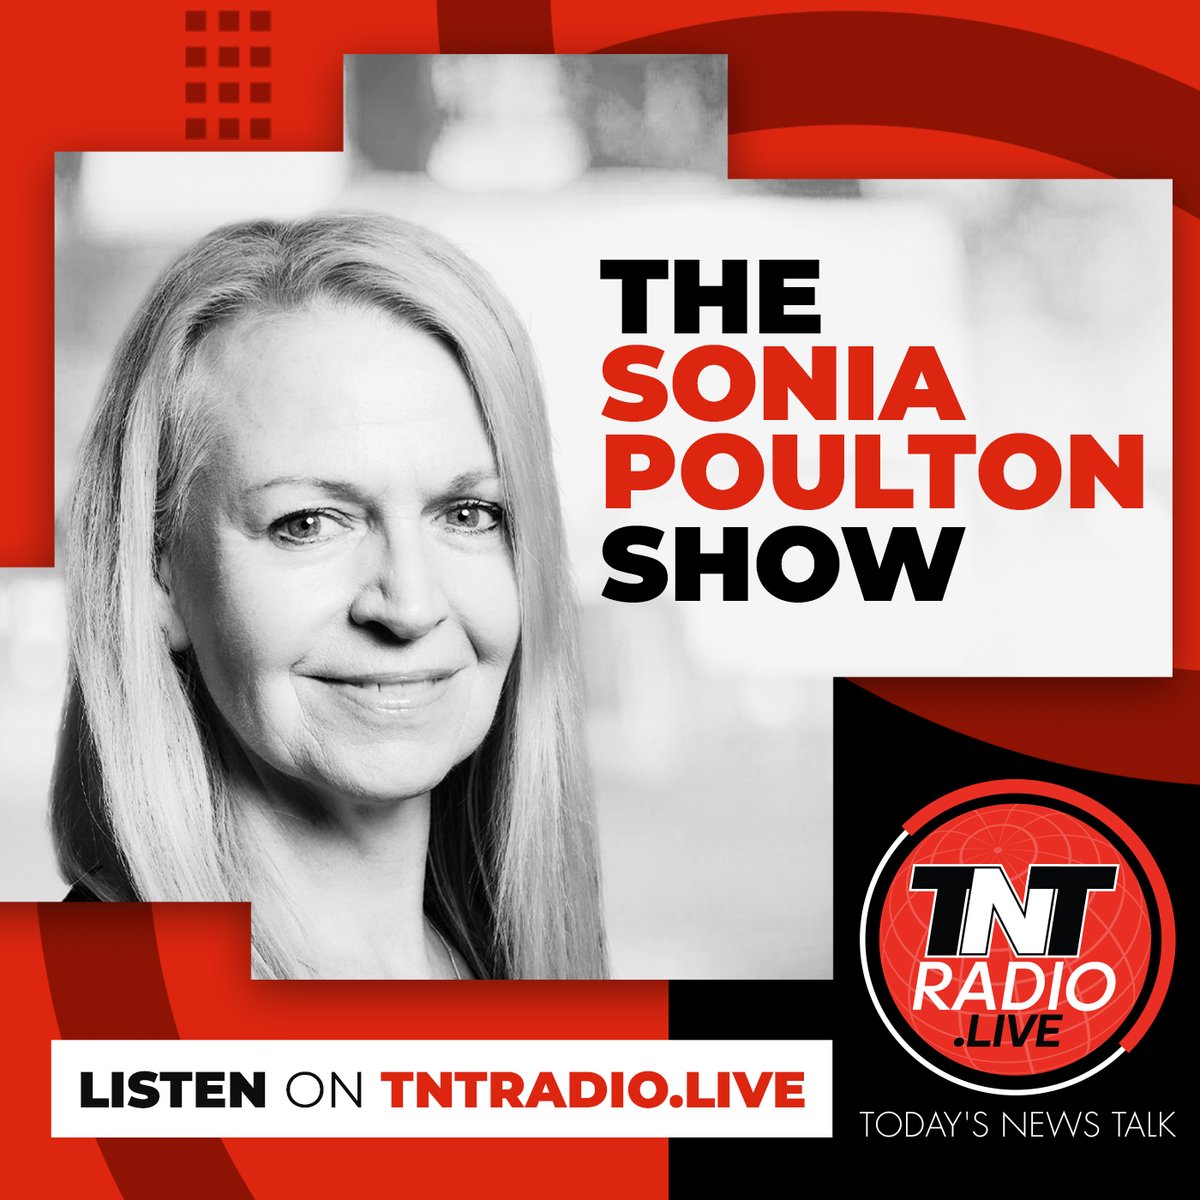 Coming up at 8am on @tntradiolive ▶️Jim Ferguson: Court of Commonsense ▶️Howard Cox: Khan 3rd Term ▶️Alec Cave: News Review ▶️Henry Bolton: End of Sunak? ▶️Sonia Elijah: New Covid? ▶️Gen Z Silence + Gender Neutral Loos Are Out? ▶️Headlines: Jemma Cooper ▶️Watch/Listen:…